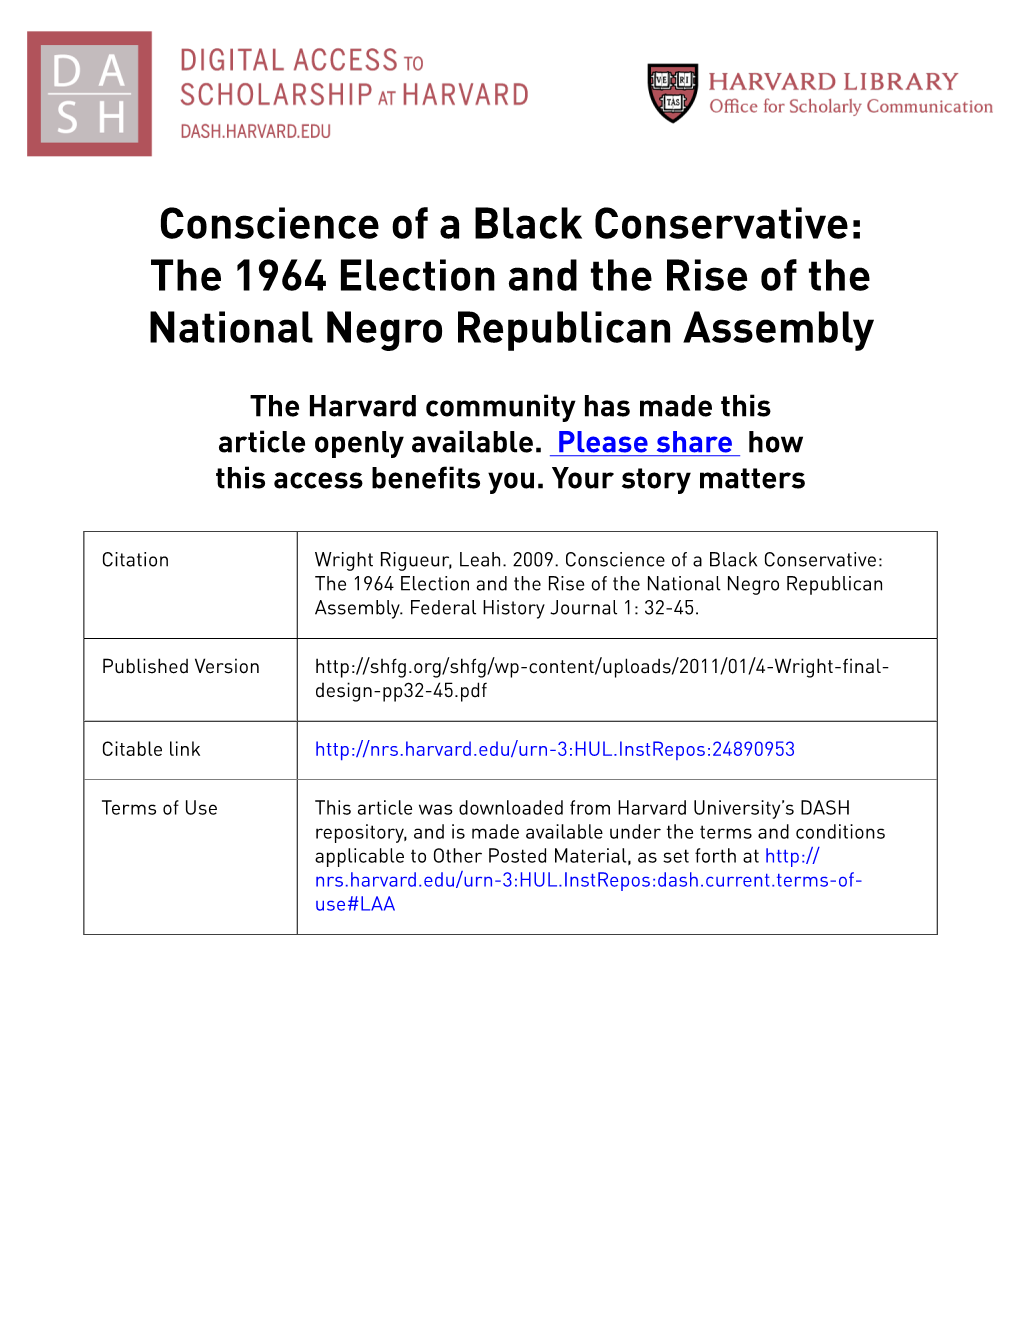 Conscience of a Black Conservative: the 1964 Election and the Rise of the National Negro Republican Assembly